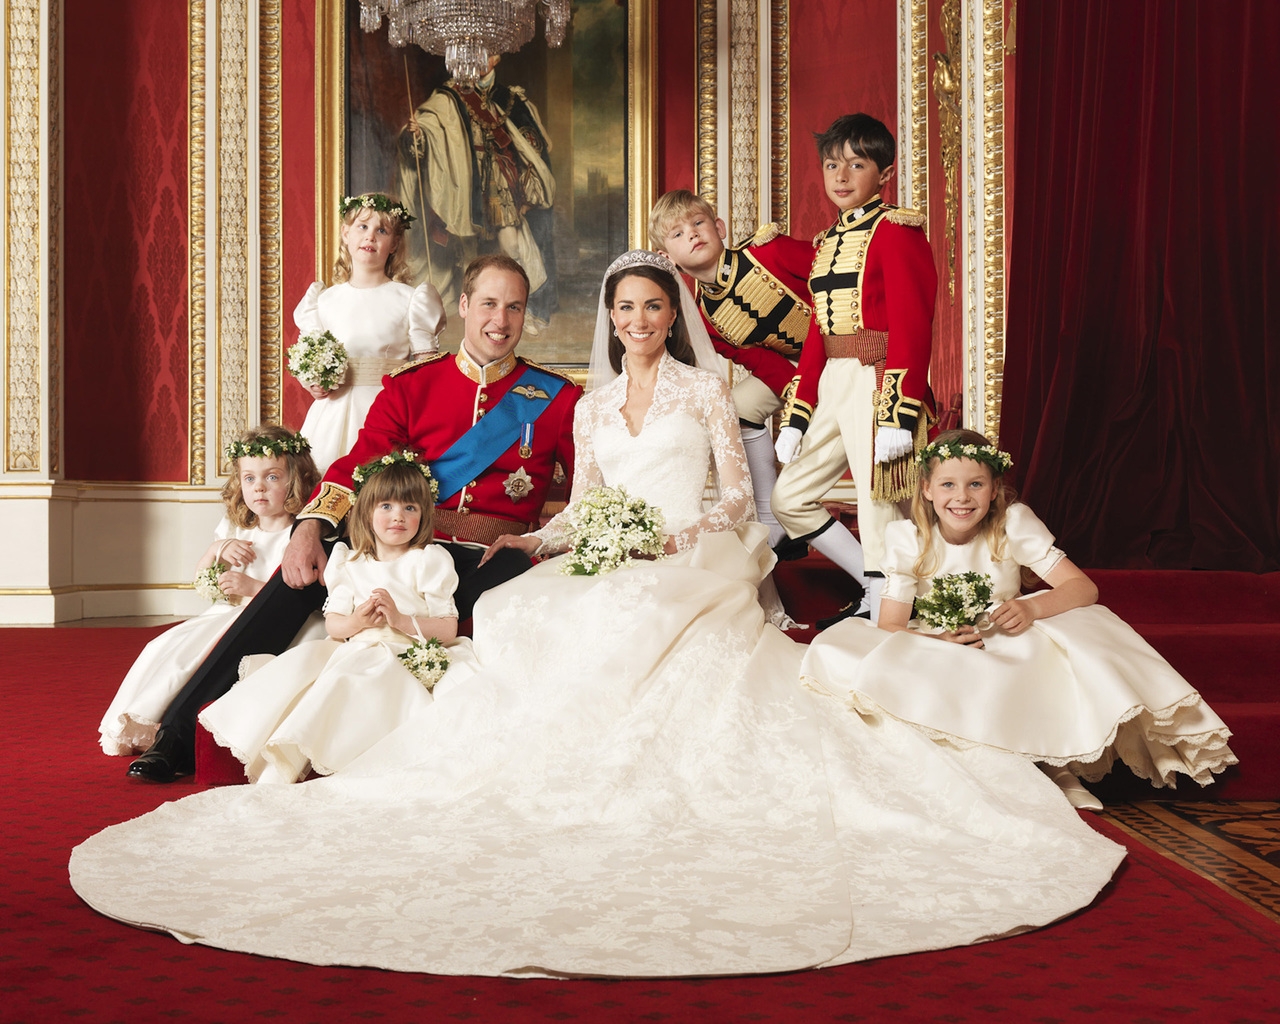 William and Kate Royal Wedding for 1280 x 1024 resolution